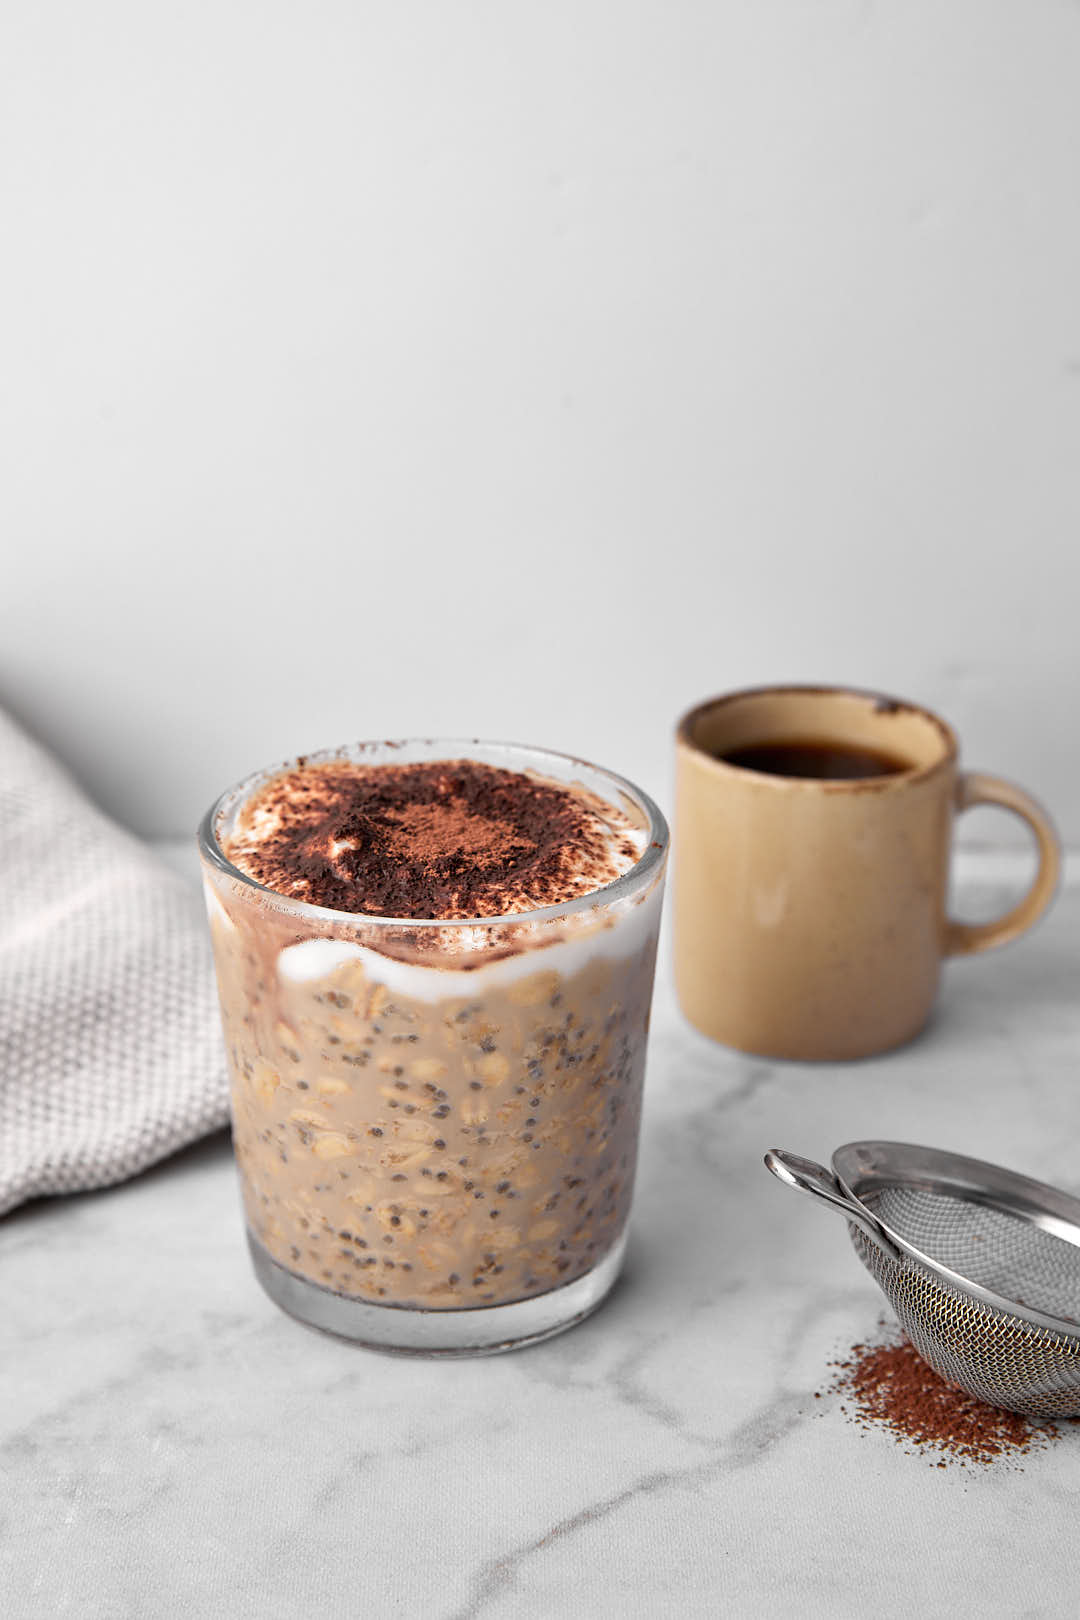 Tiramisu oats in a glass with a cocoa sifter and a mug in the background.